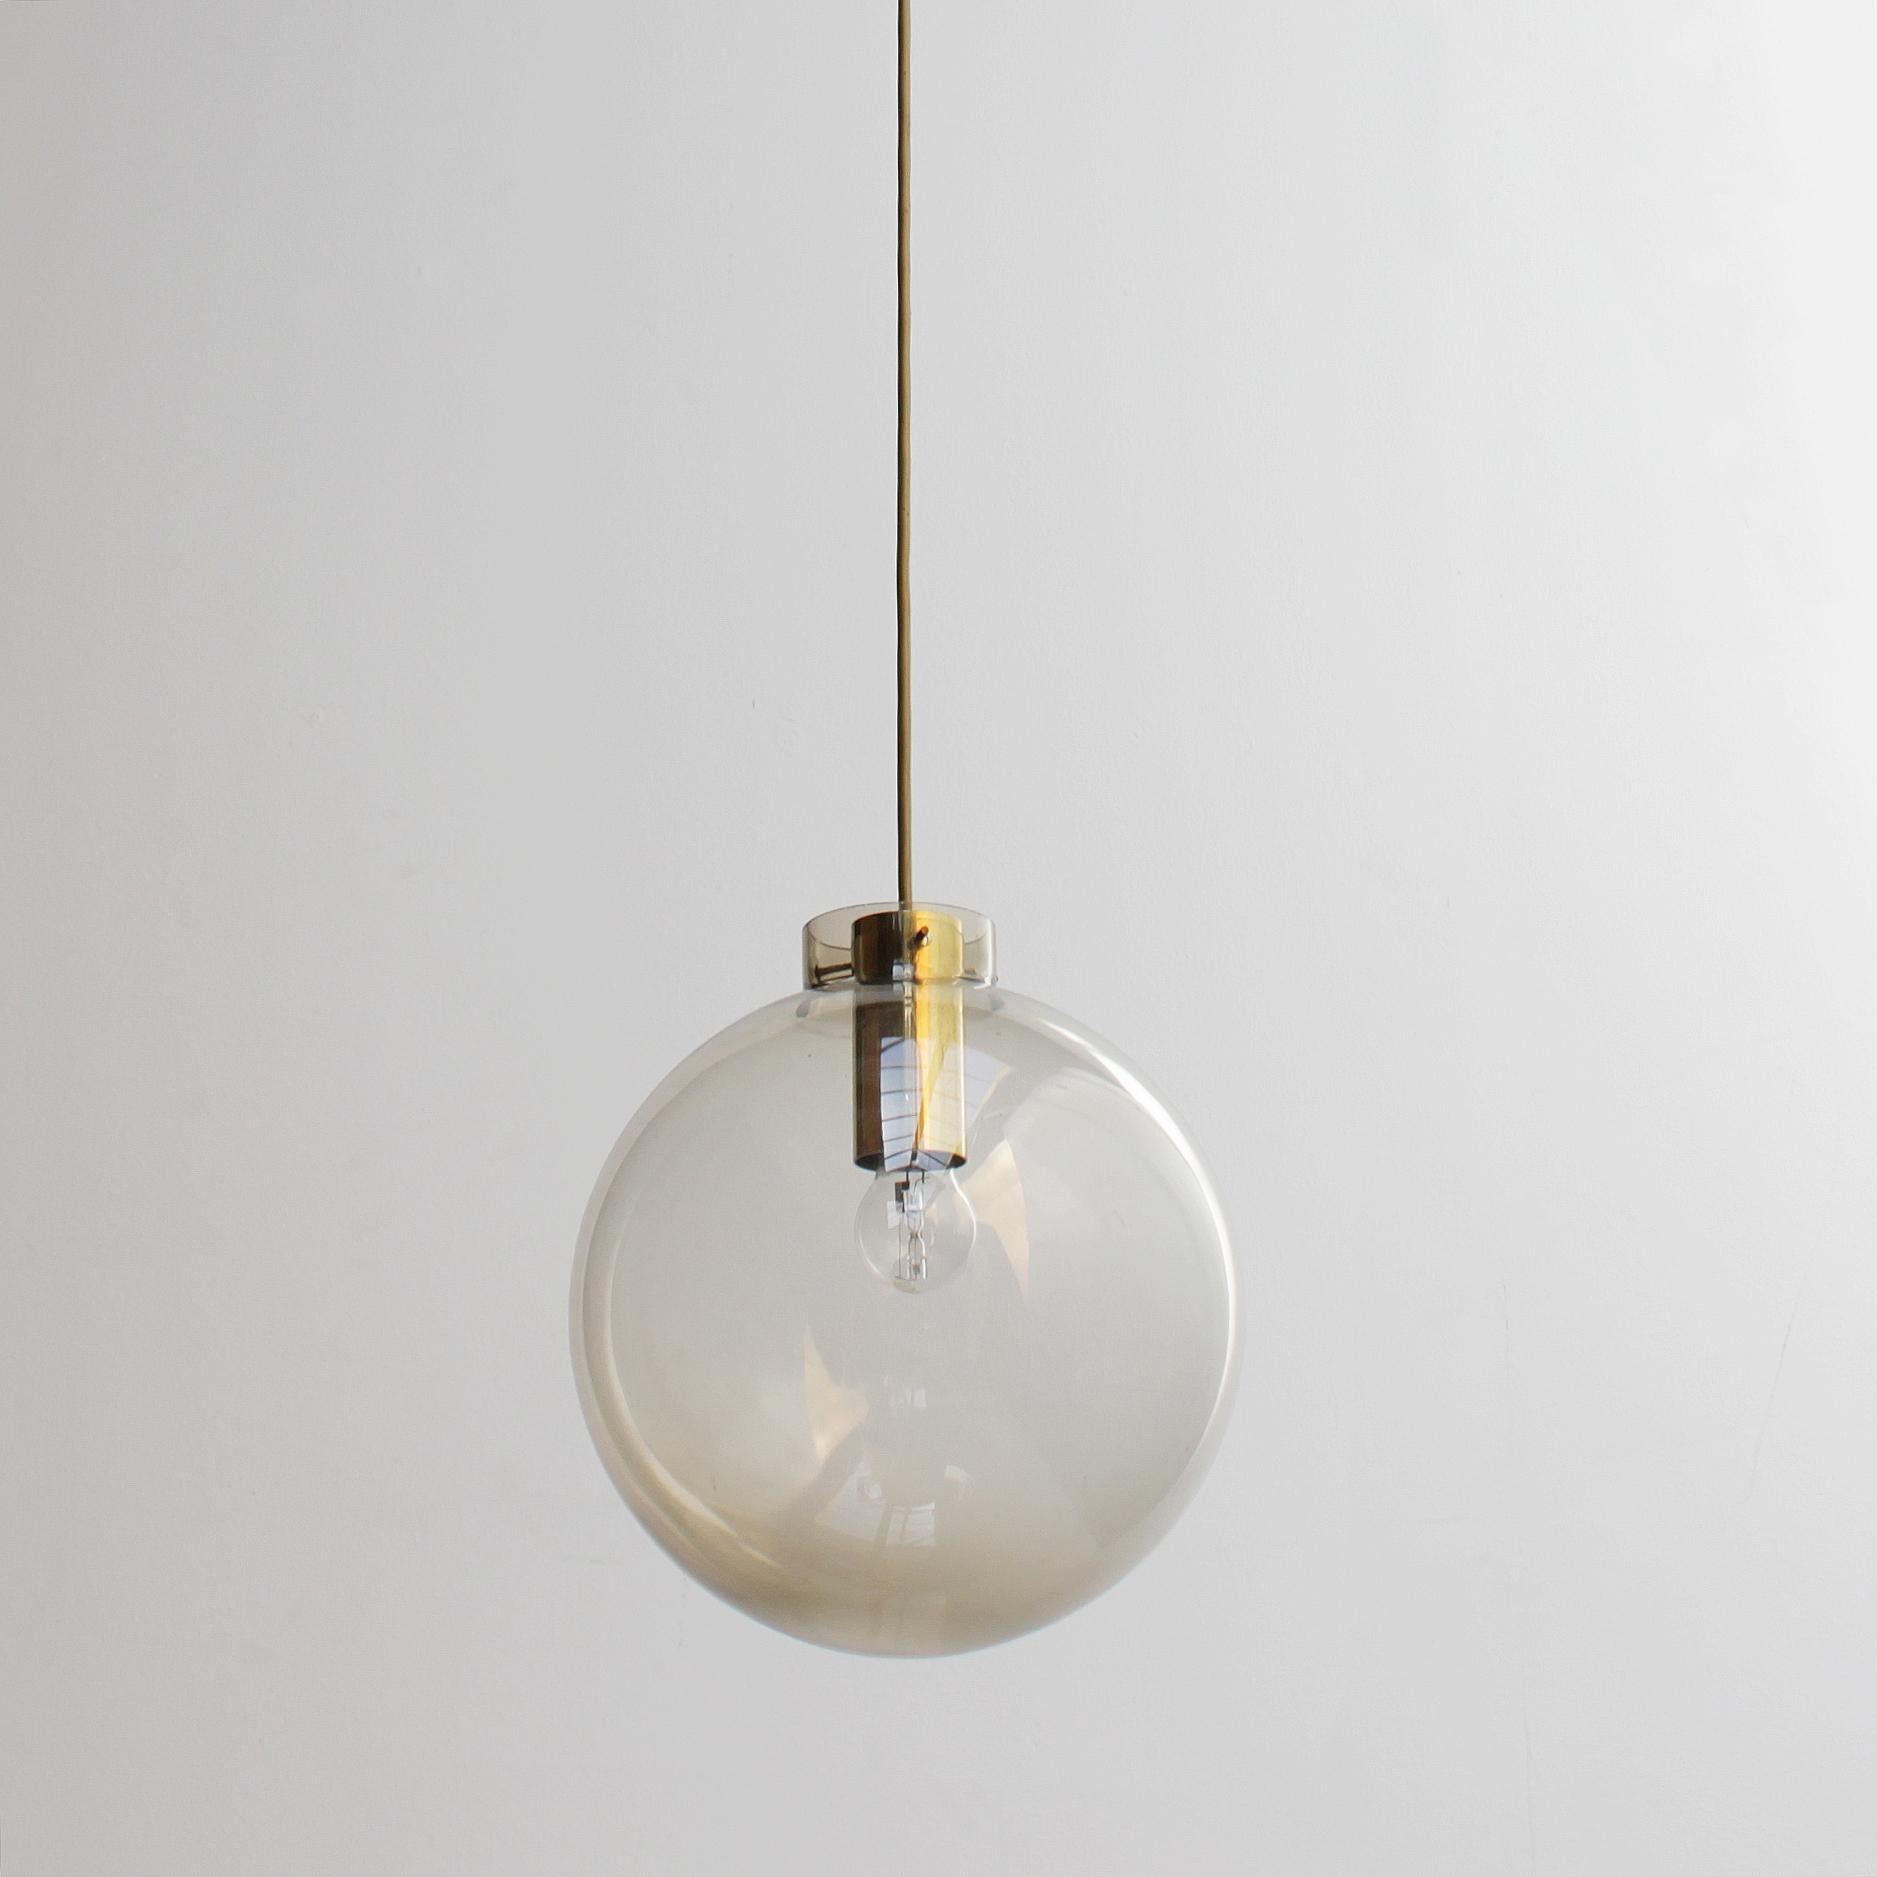 Pendant with a large smoke glass sphere, brass details and ceiling plate. Beautifully crafted details and construction, well and solidly executed. 
Diameter of the sphere: 11.5 inches (29 cm), length wire about 23.0 in. (60 cm). 
Bulb (E27 26-27